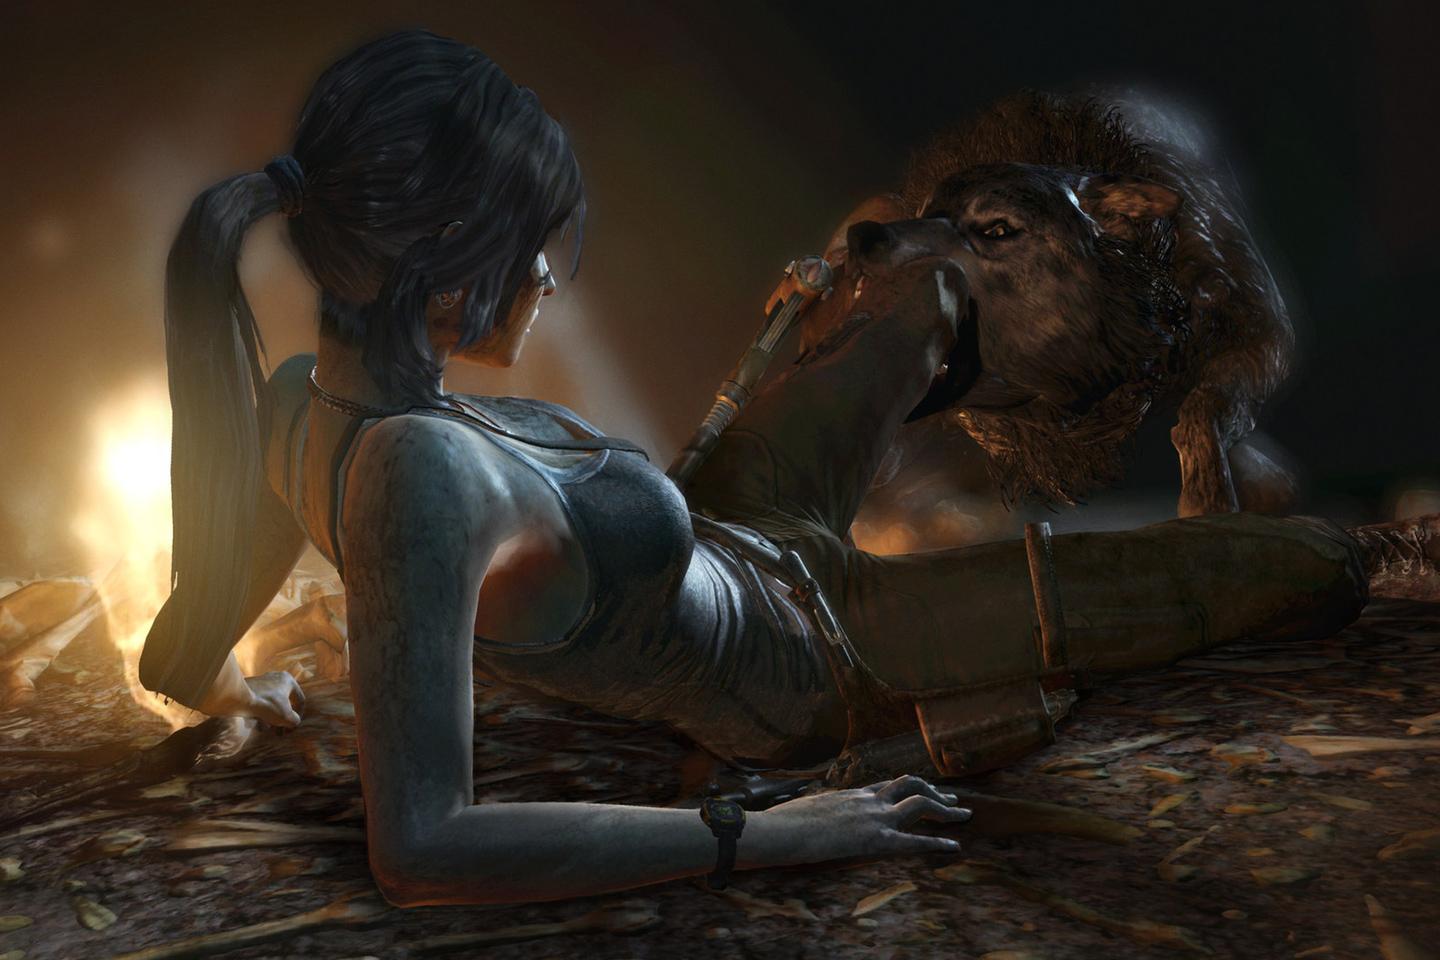 Lara being attacked by a wolf who has hold of her left leg.